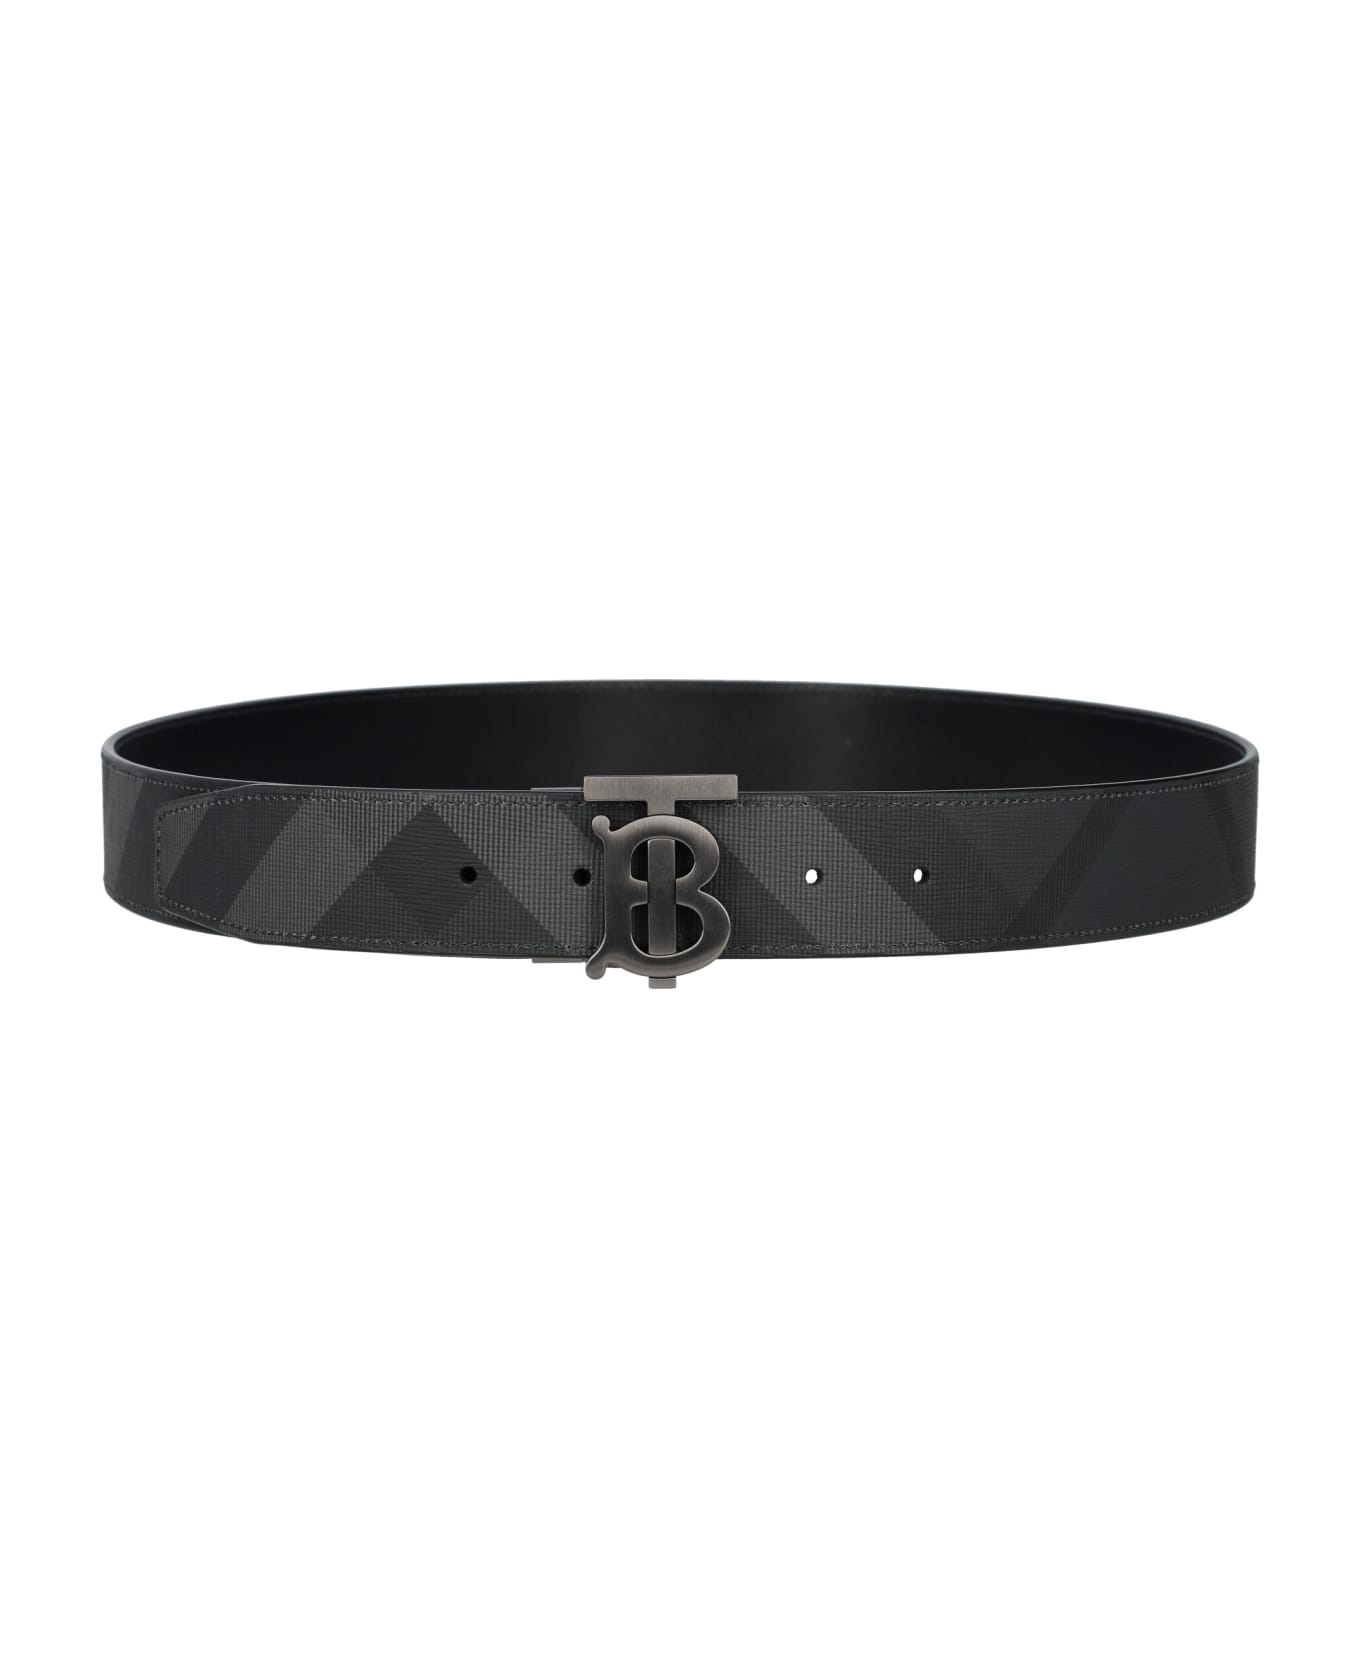 Burberry London Check And Leather Reversible Tb Belt - CHARCOAL/GRAPHITE